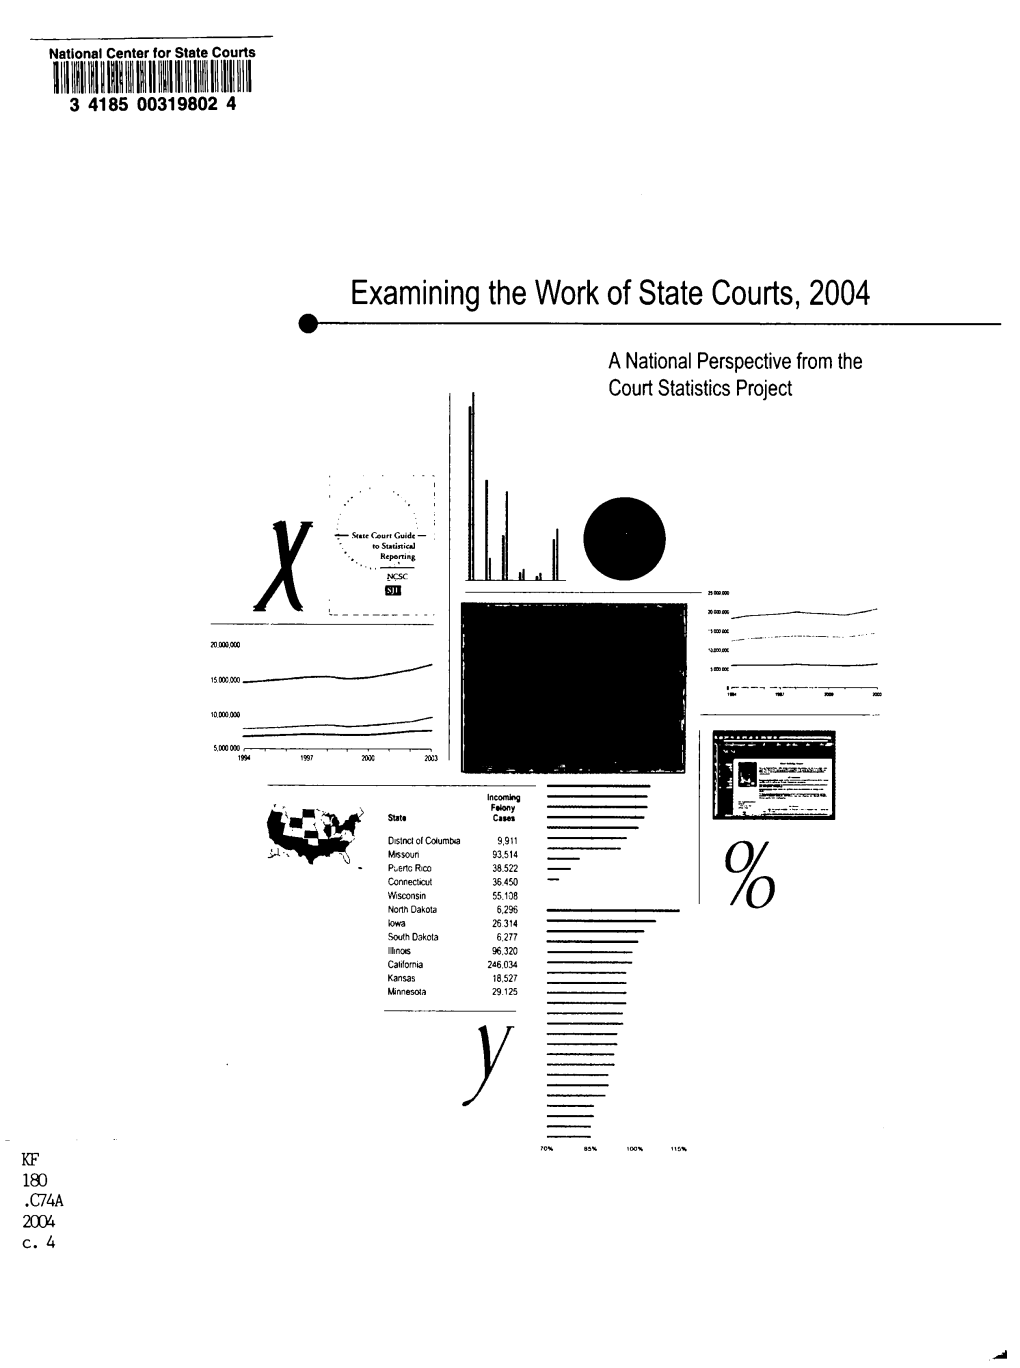 Examining the Work of State Courts 2004, A